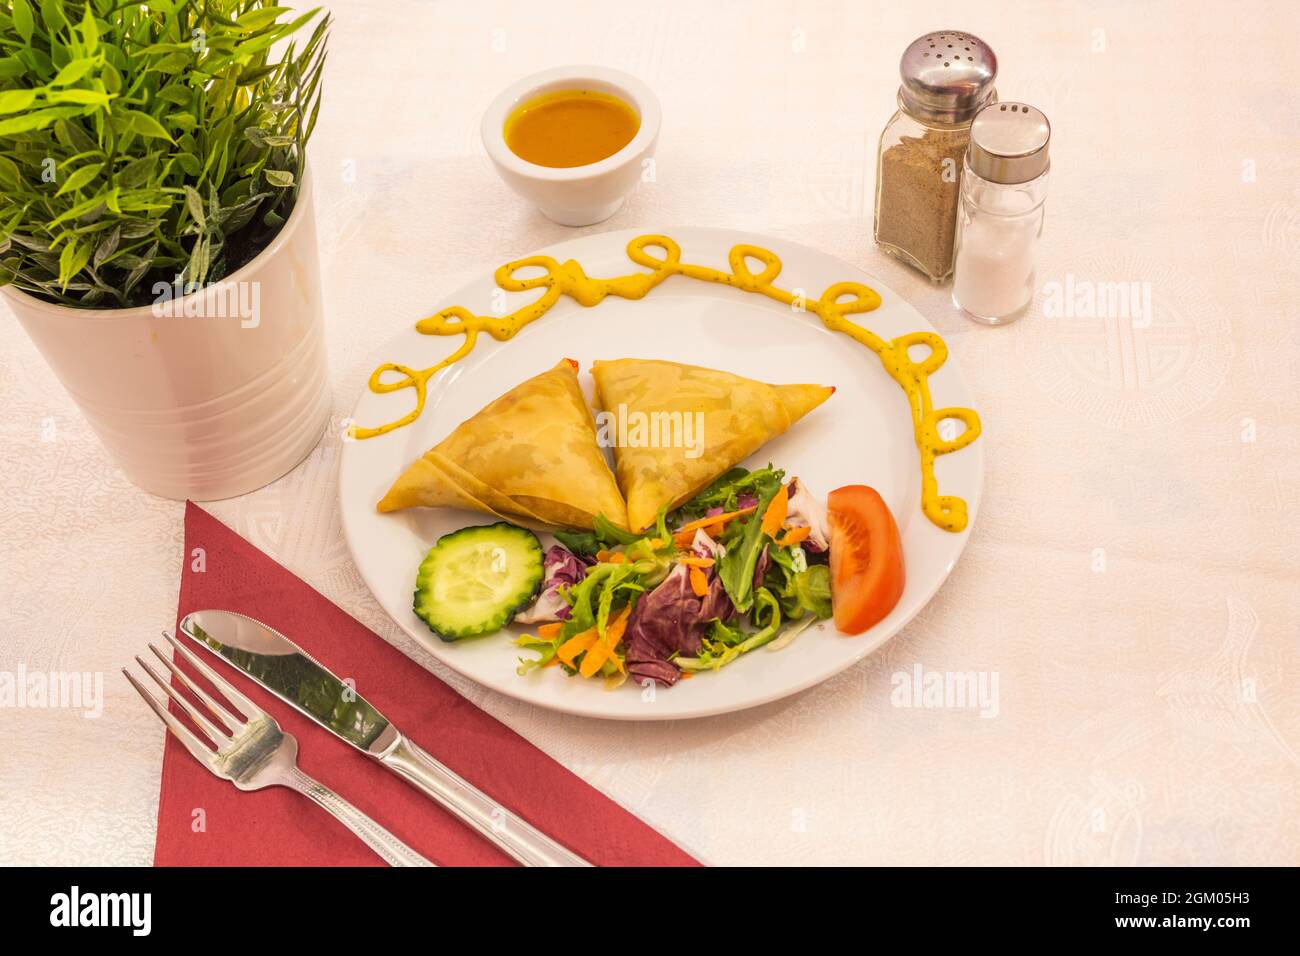 Fried samosas with salad garnish served in a Pakistani restaurant with red paper napkins. Stock Photo